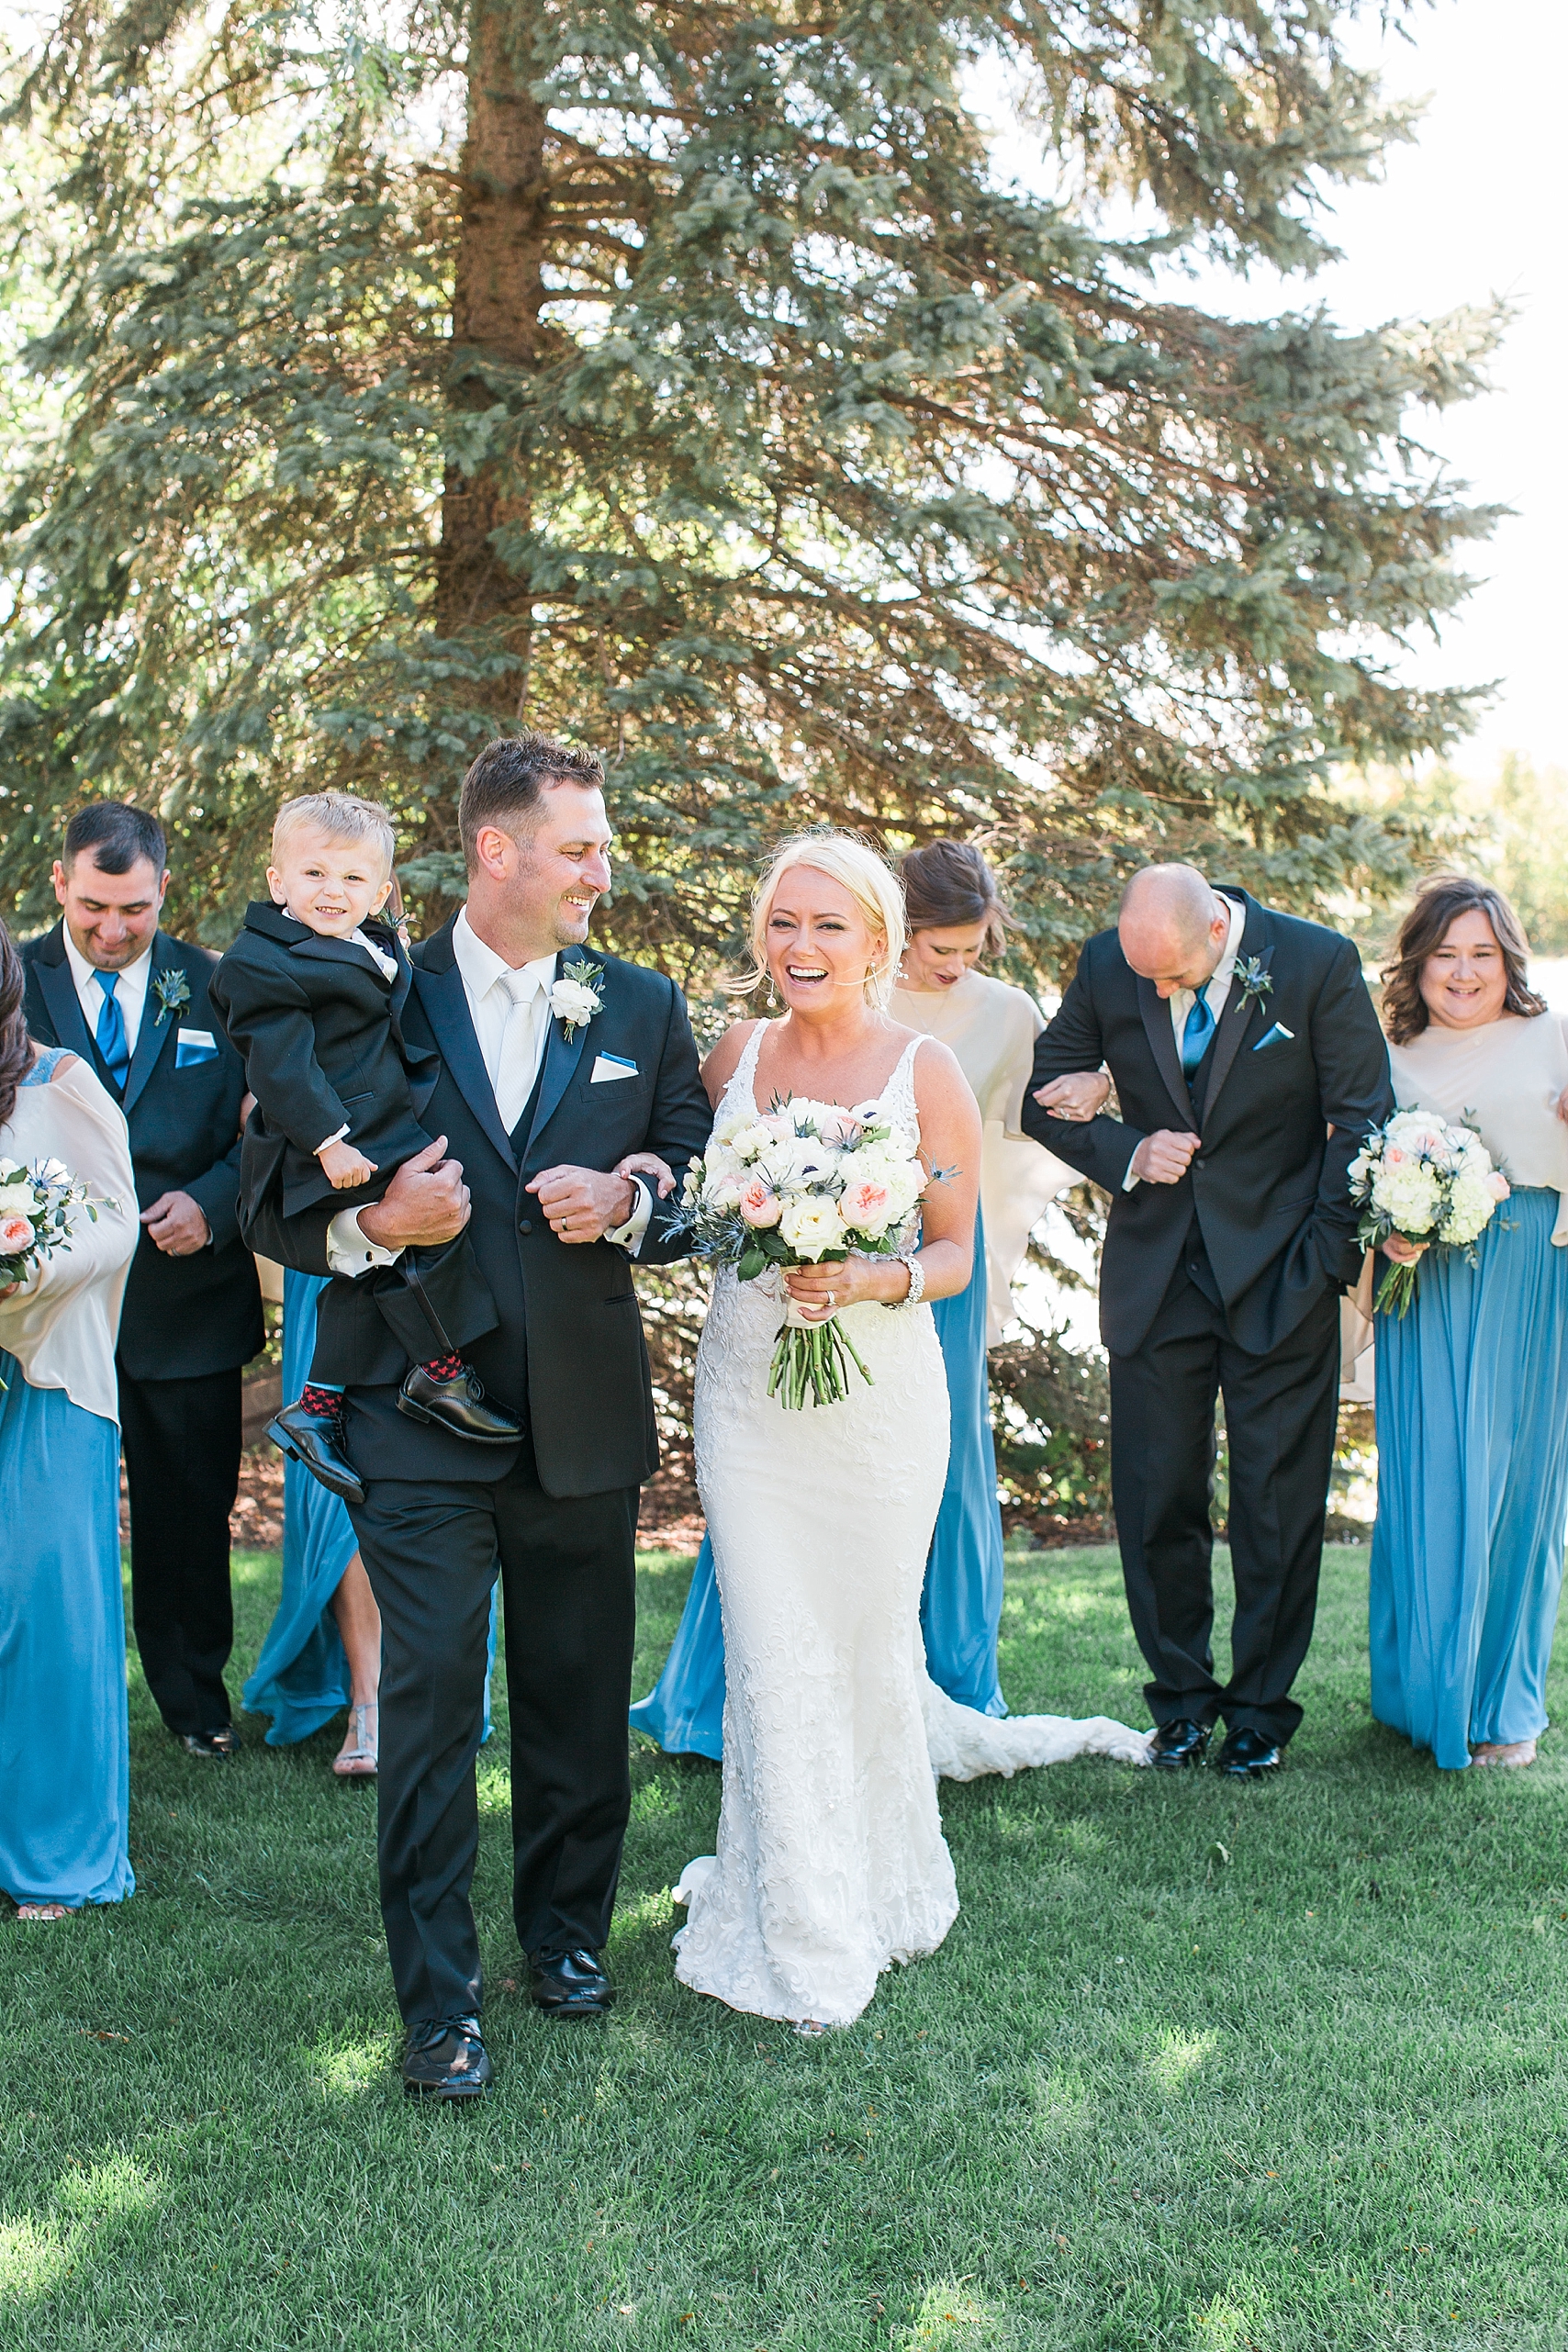 Wedding party black suits blue dresses walking and laughing on wedding day at the Chart House Summer Wedding Lakeville Minnesota Minneapolis Wedding Photographer Mallory Kiesow